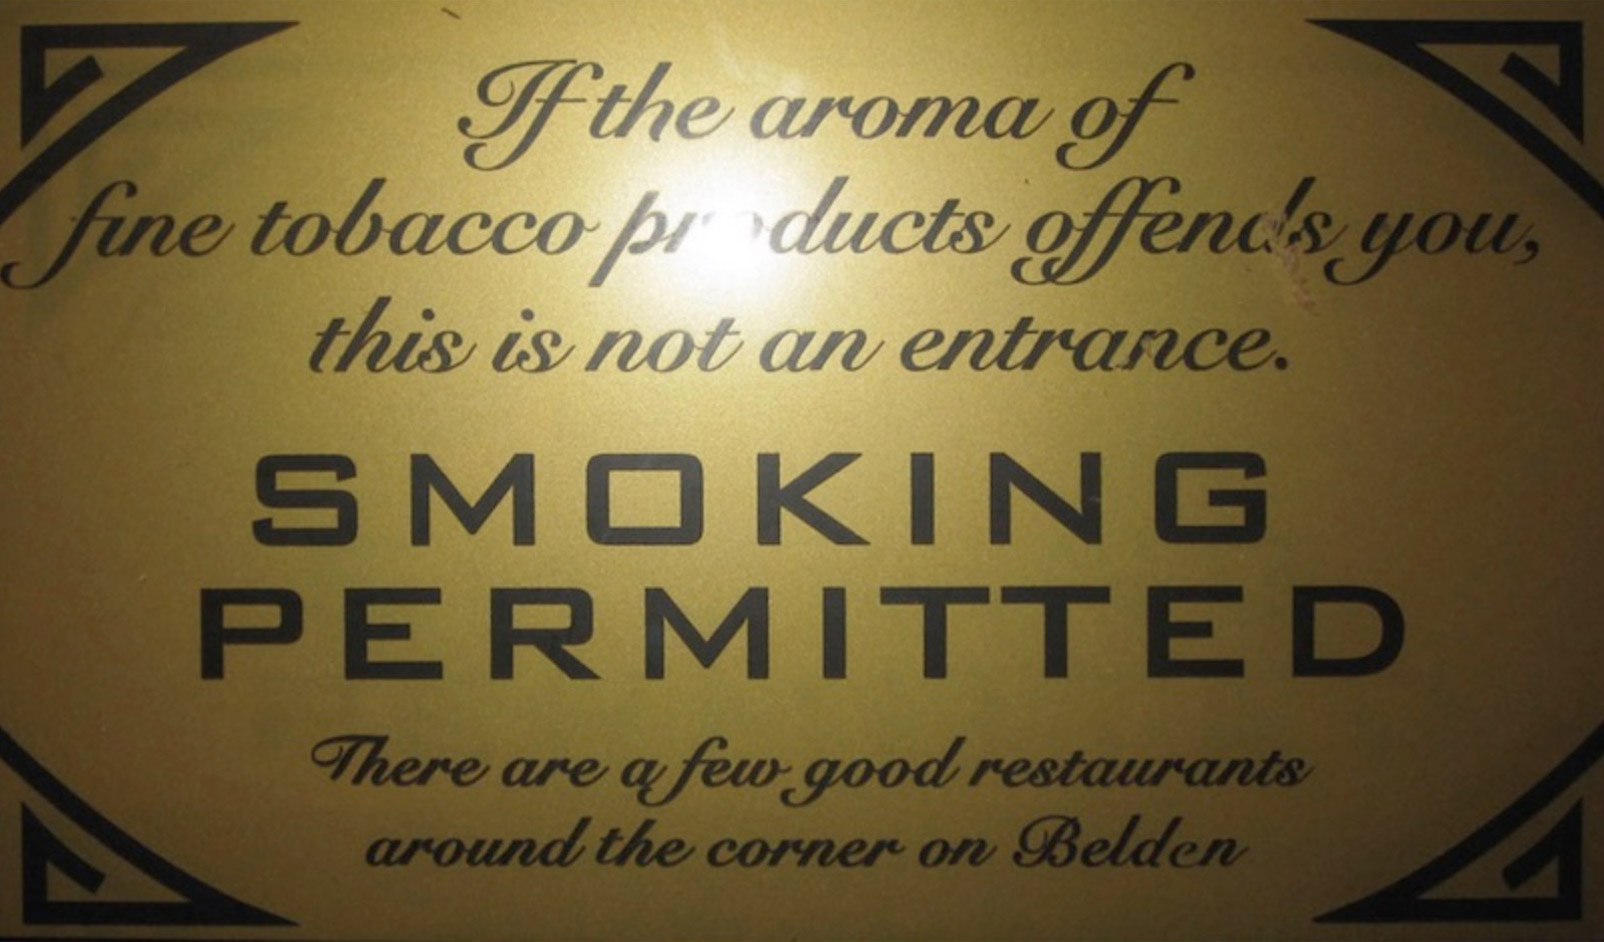 If the aroma of fine tobacco products offends you, this is not an entrance. SMOKING PERMITTED. There are a few good restaurants around the corner on Belden.